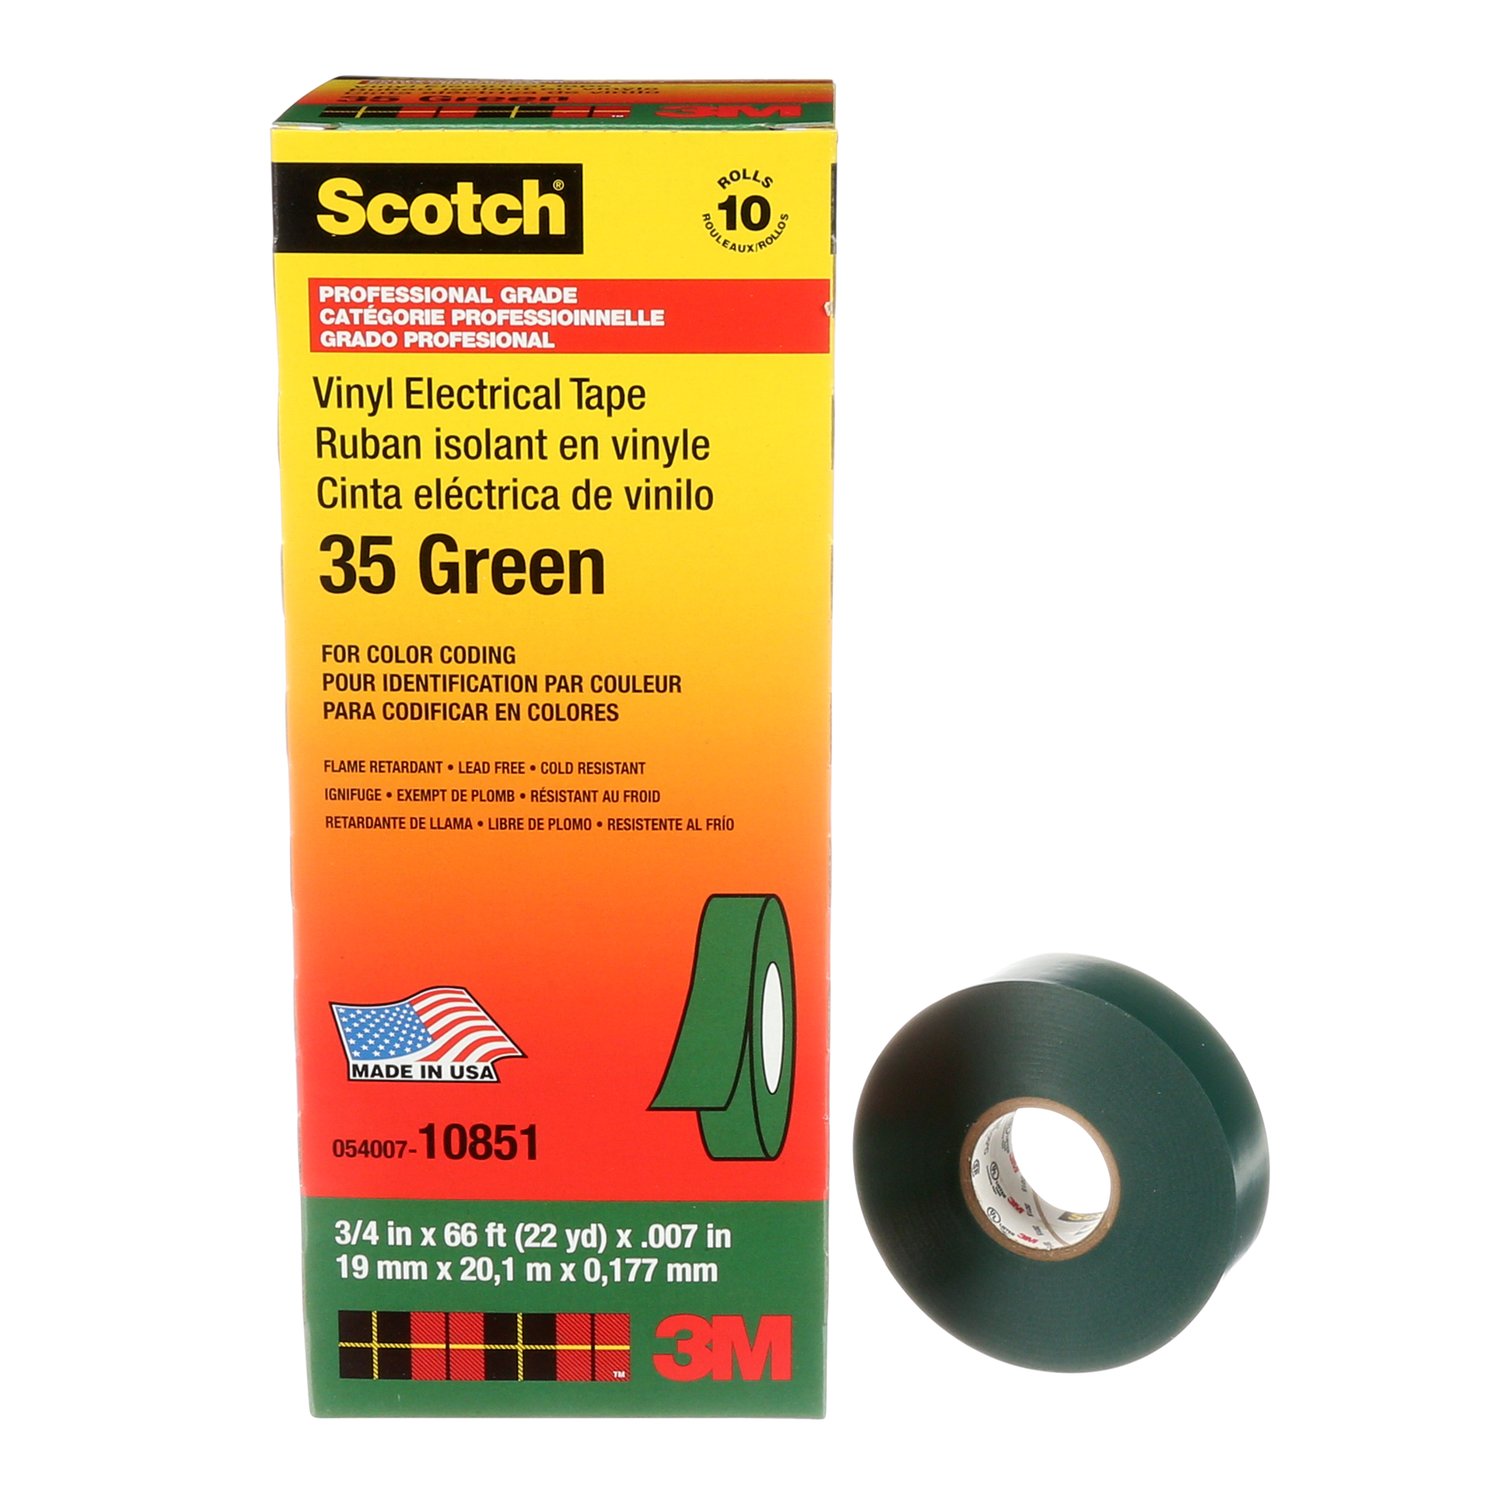 7000006098 - Scotch Vinyl Color Coding Electrical Tape 35, 3/4 in x 66 ft, Green, 10
rolls/carton, 100 rolls/Case